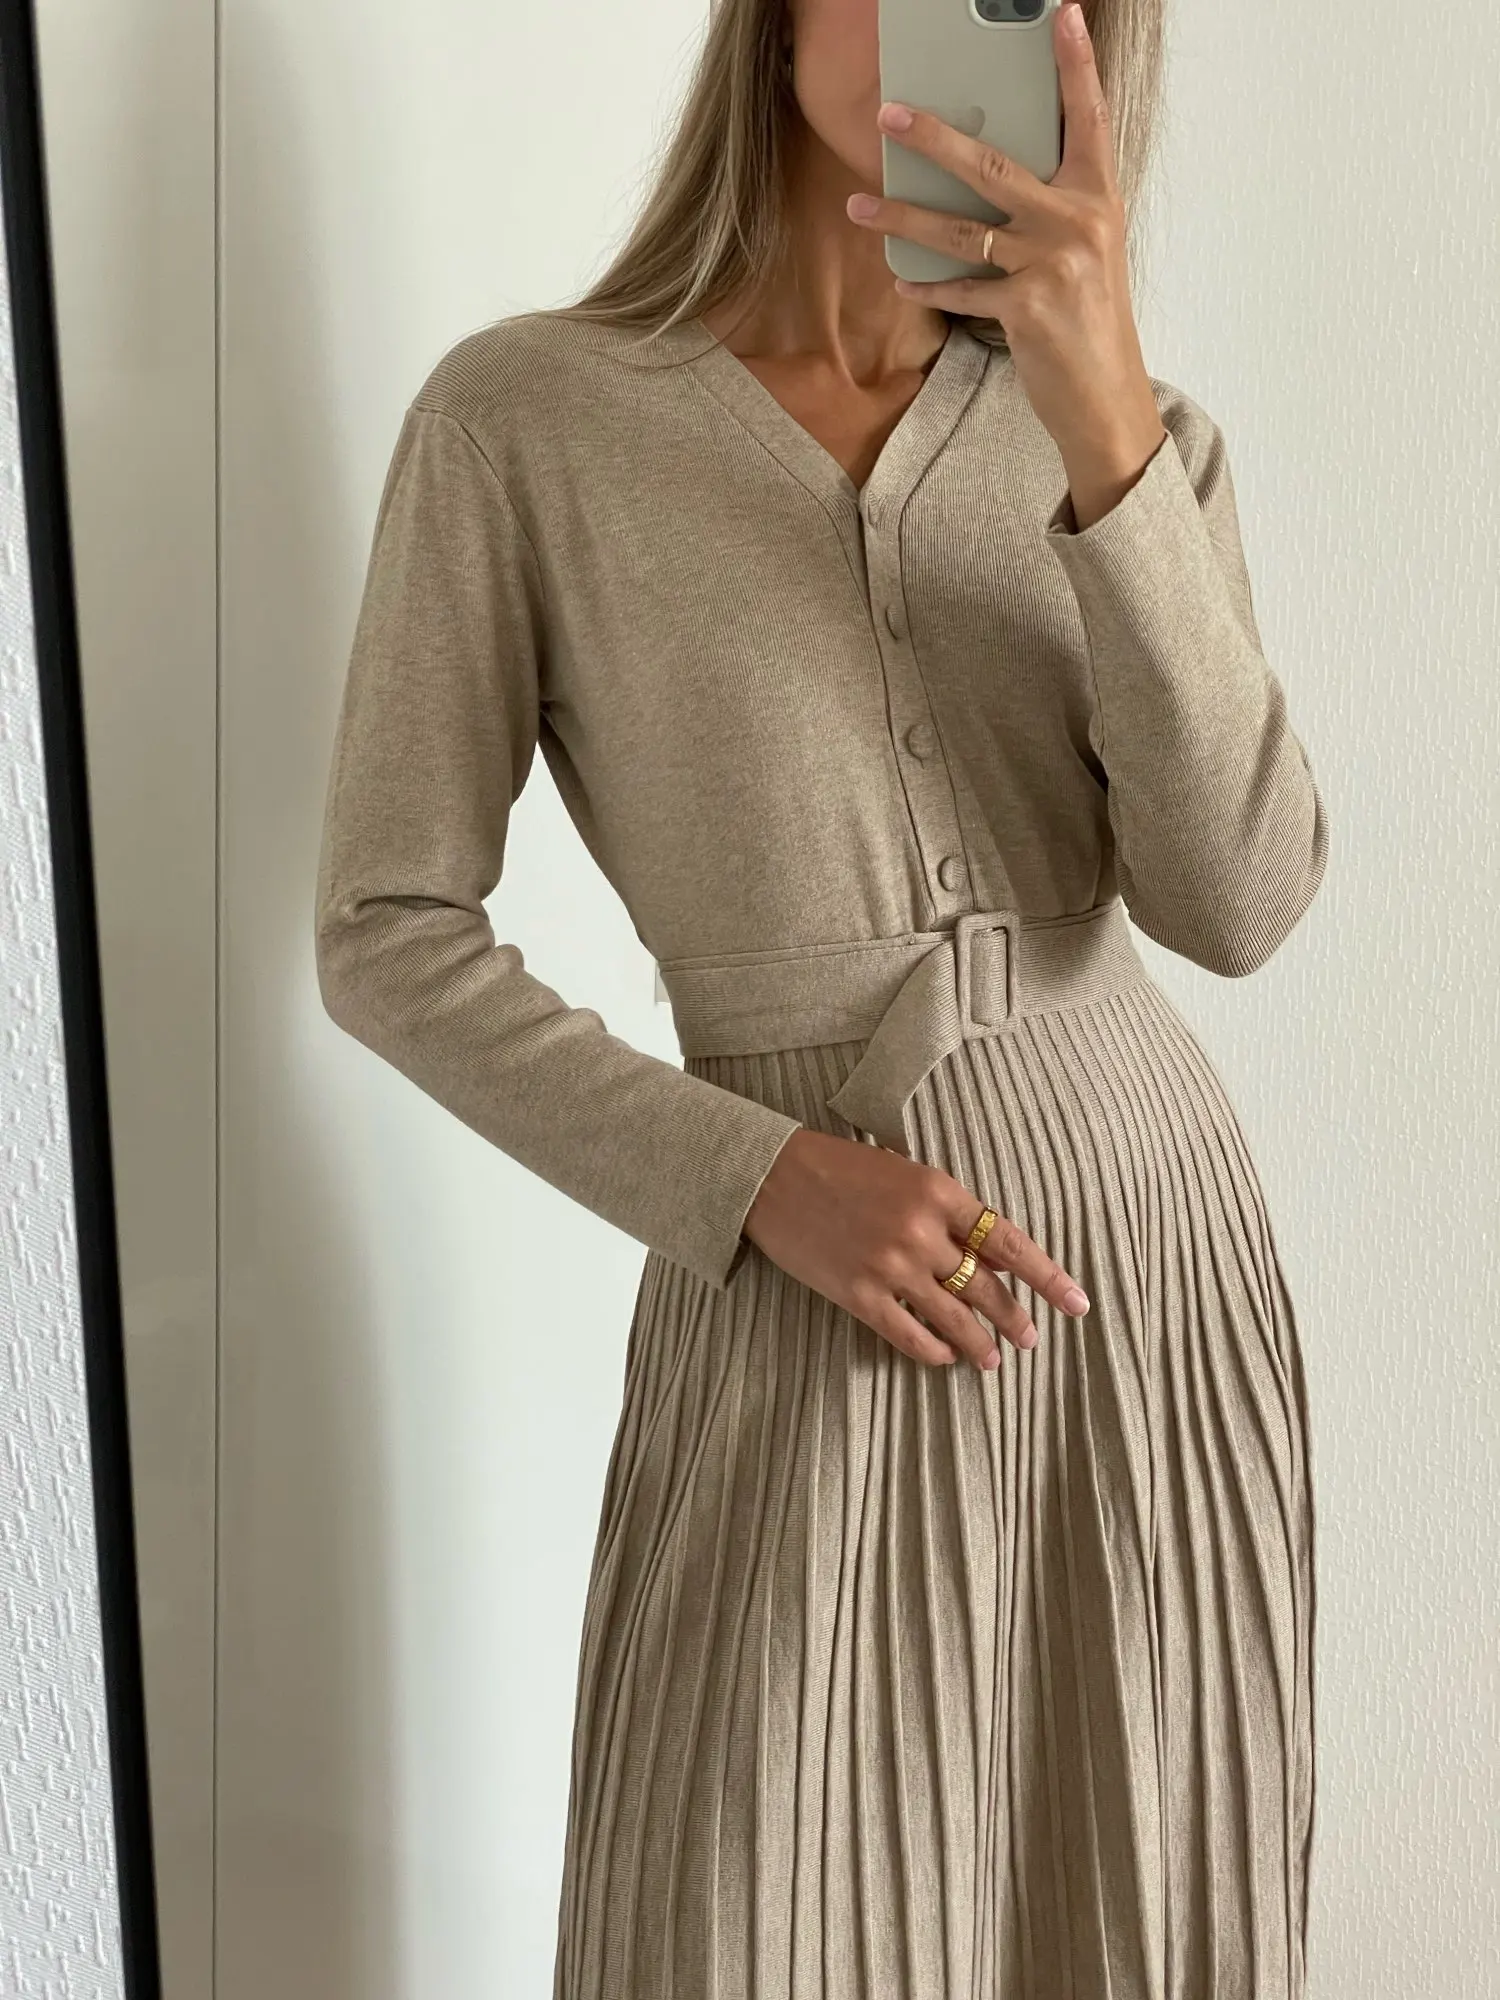 Bgteever- Elegant Thick Sweater Dress For Women, Single-breasted And V-neck, Soft Trapeze Dress With Belt, Fall Winter Collection 2021 photo review